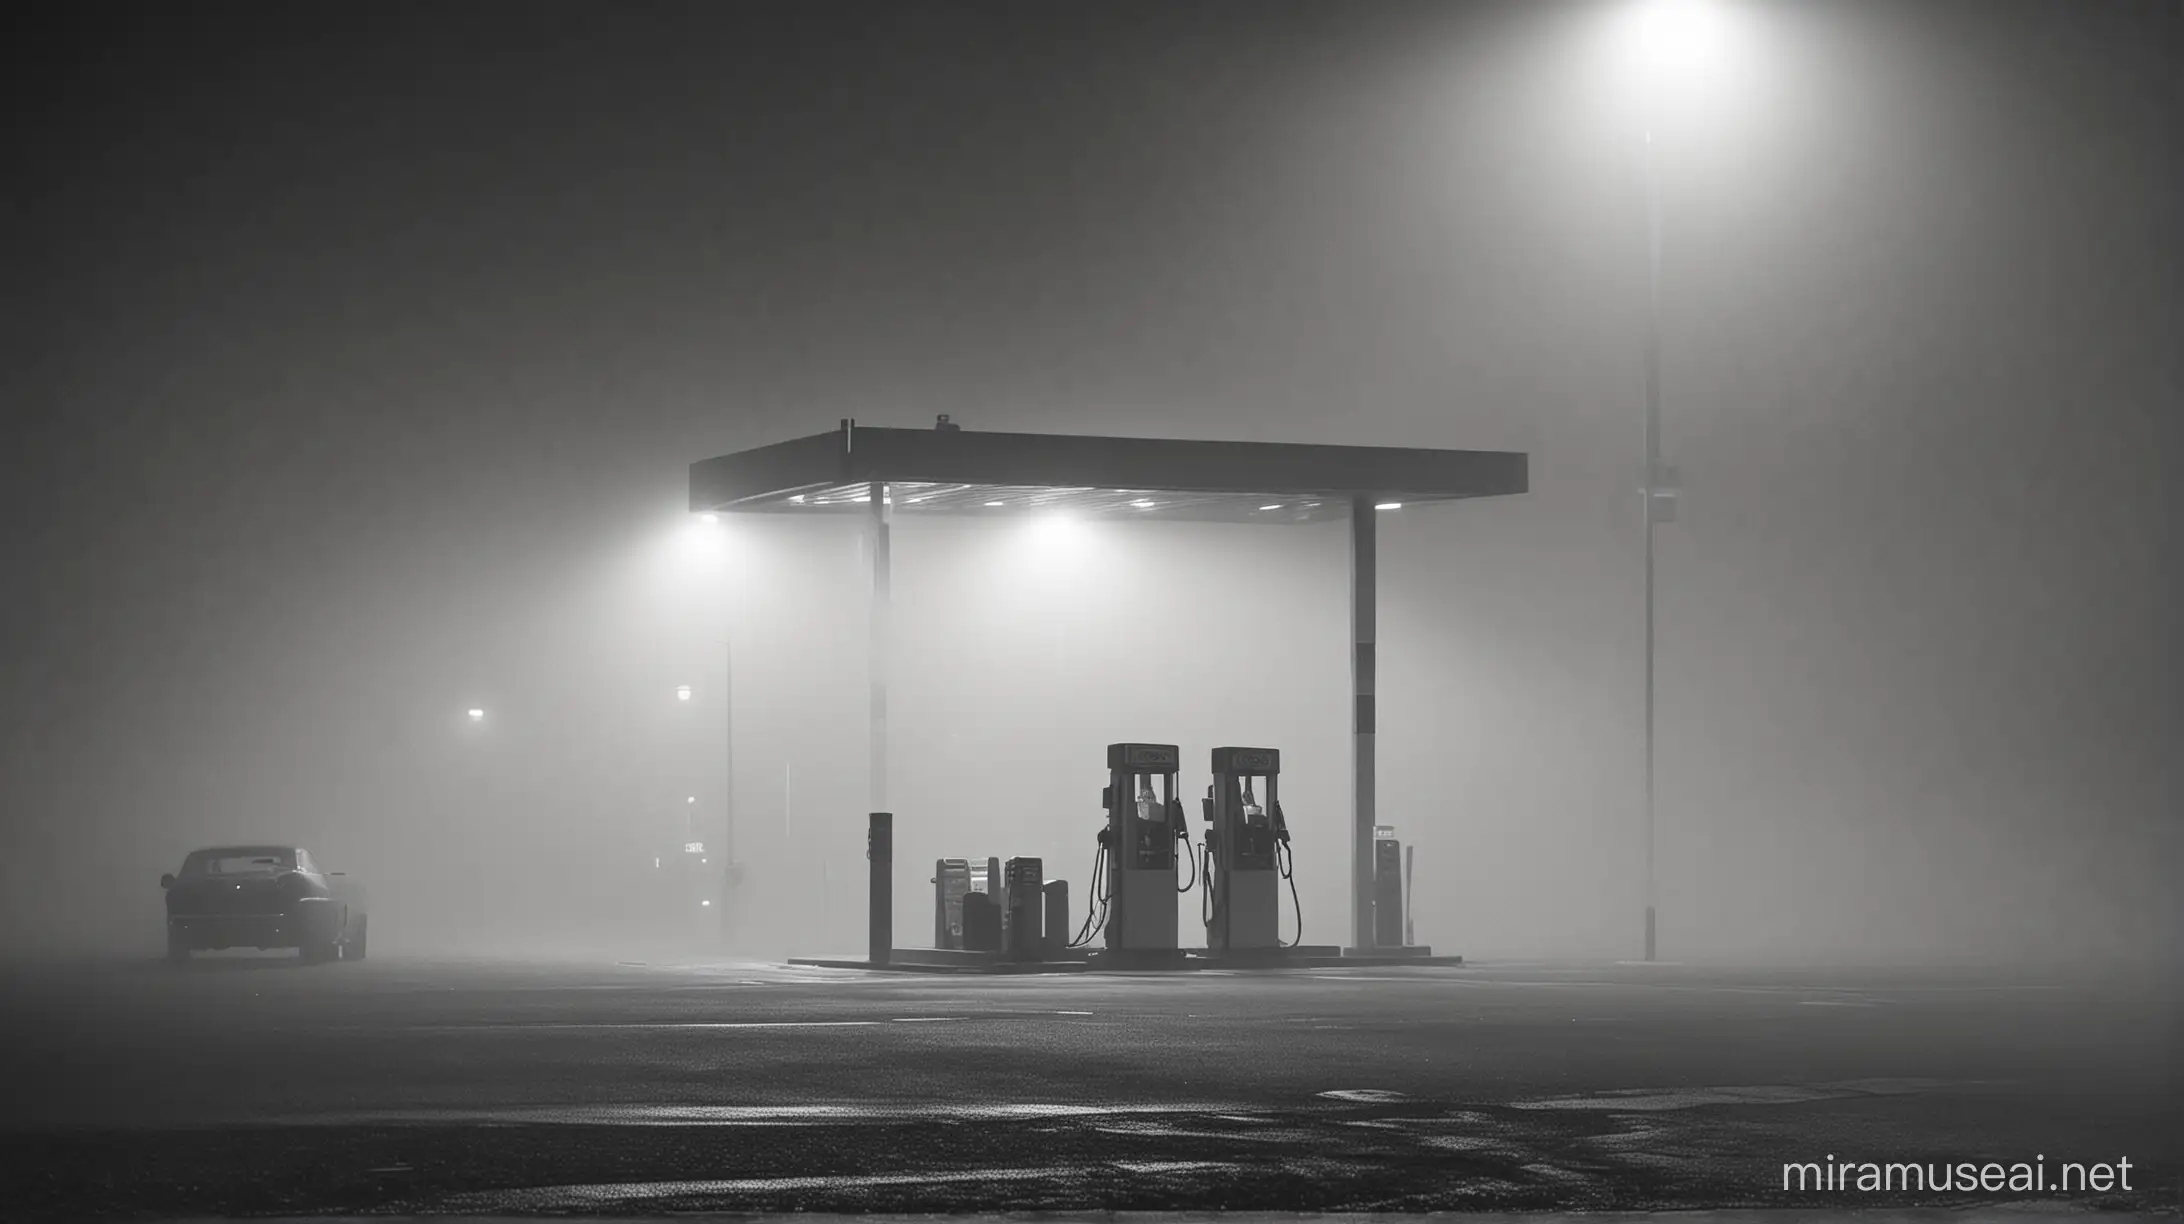 Thick fog hovered over the road as the car quietly arrived at the gas station in the middle of the night. The driver, Mark, felt unease as he stepped out of the vehicle, scanning around for any signs of life. But all he saw were dark silhouettes of gas pumps and eerie emptiness.